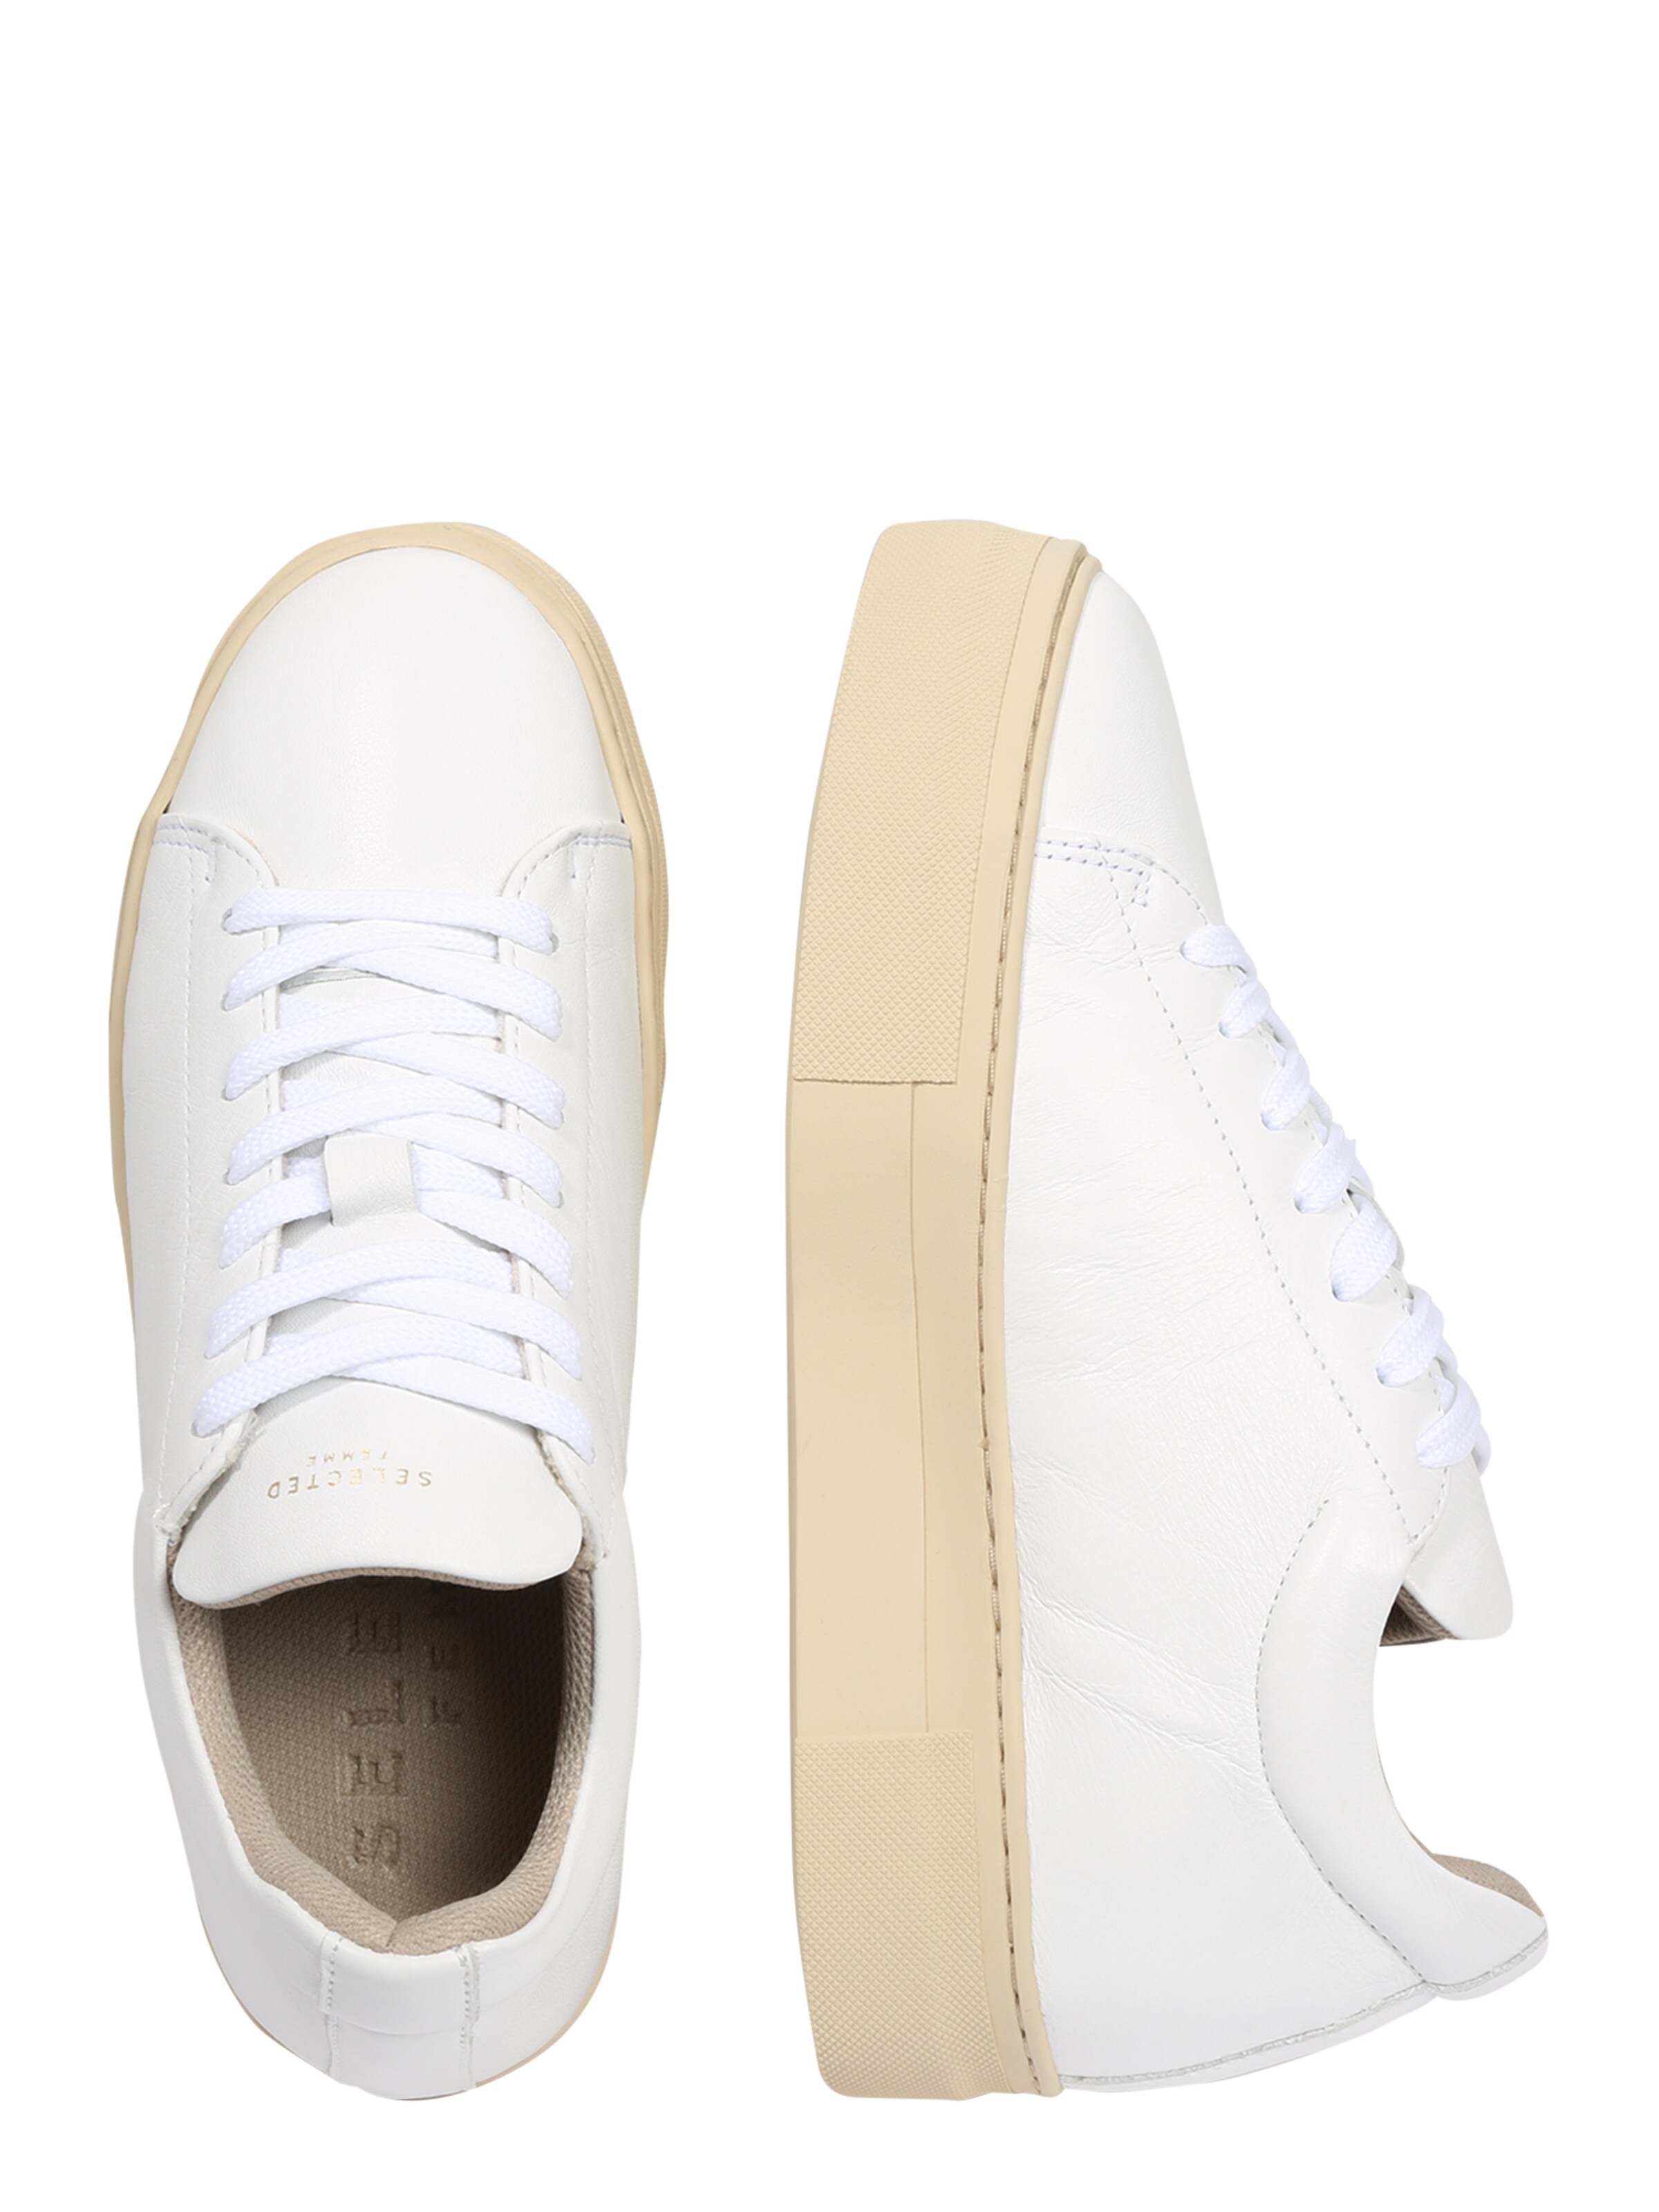 Sneakers Donna SELECTED FEMME Sneaker bassa HAILEY in Bianco 